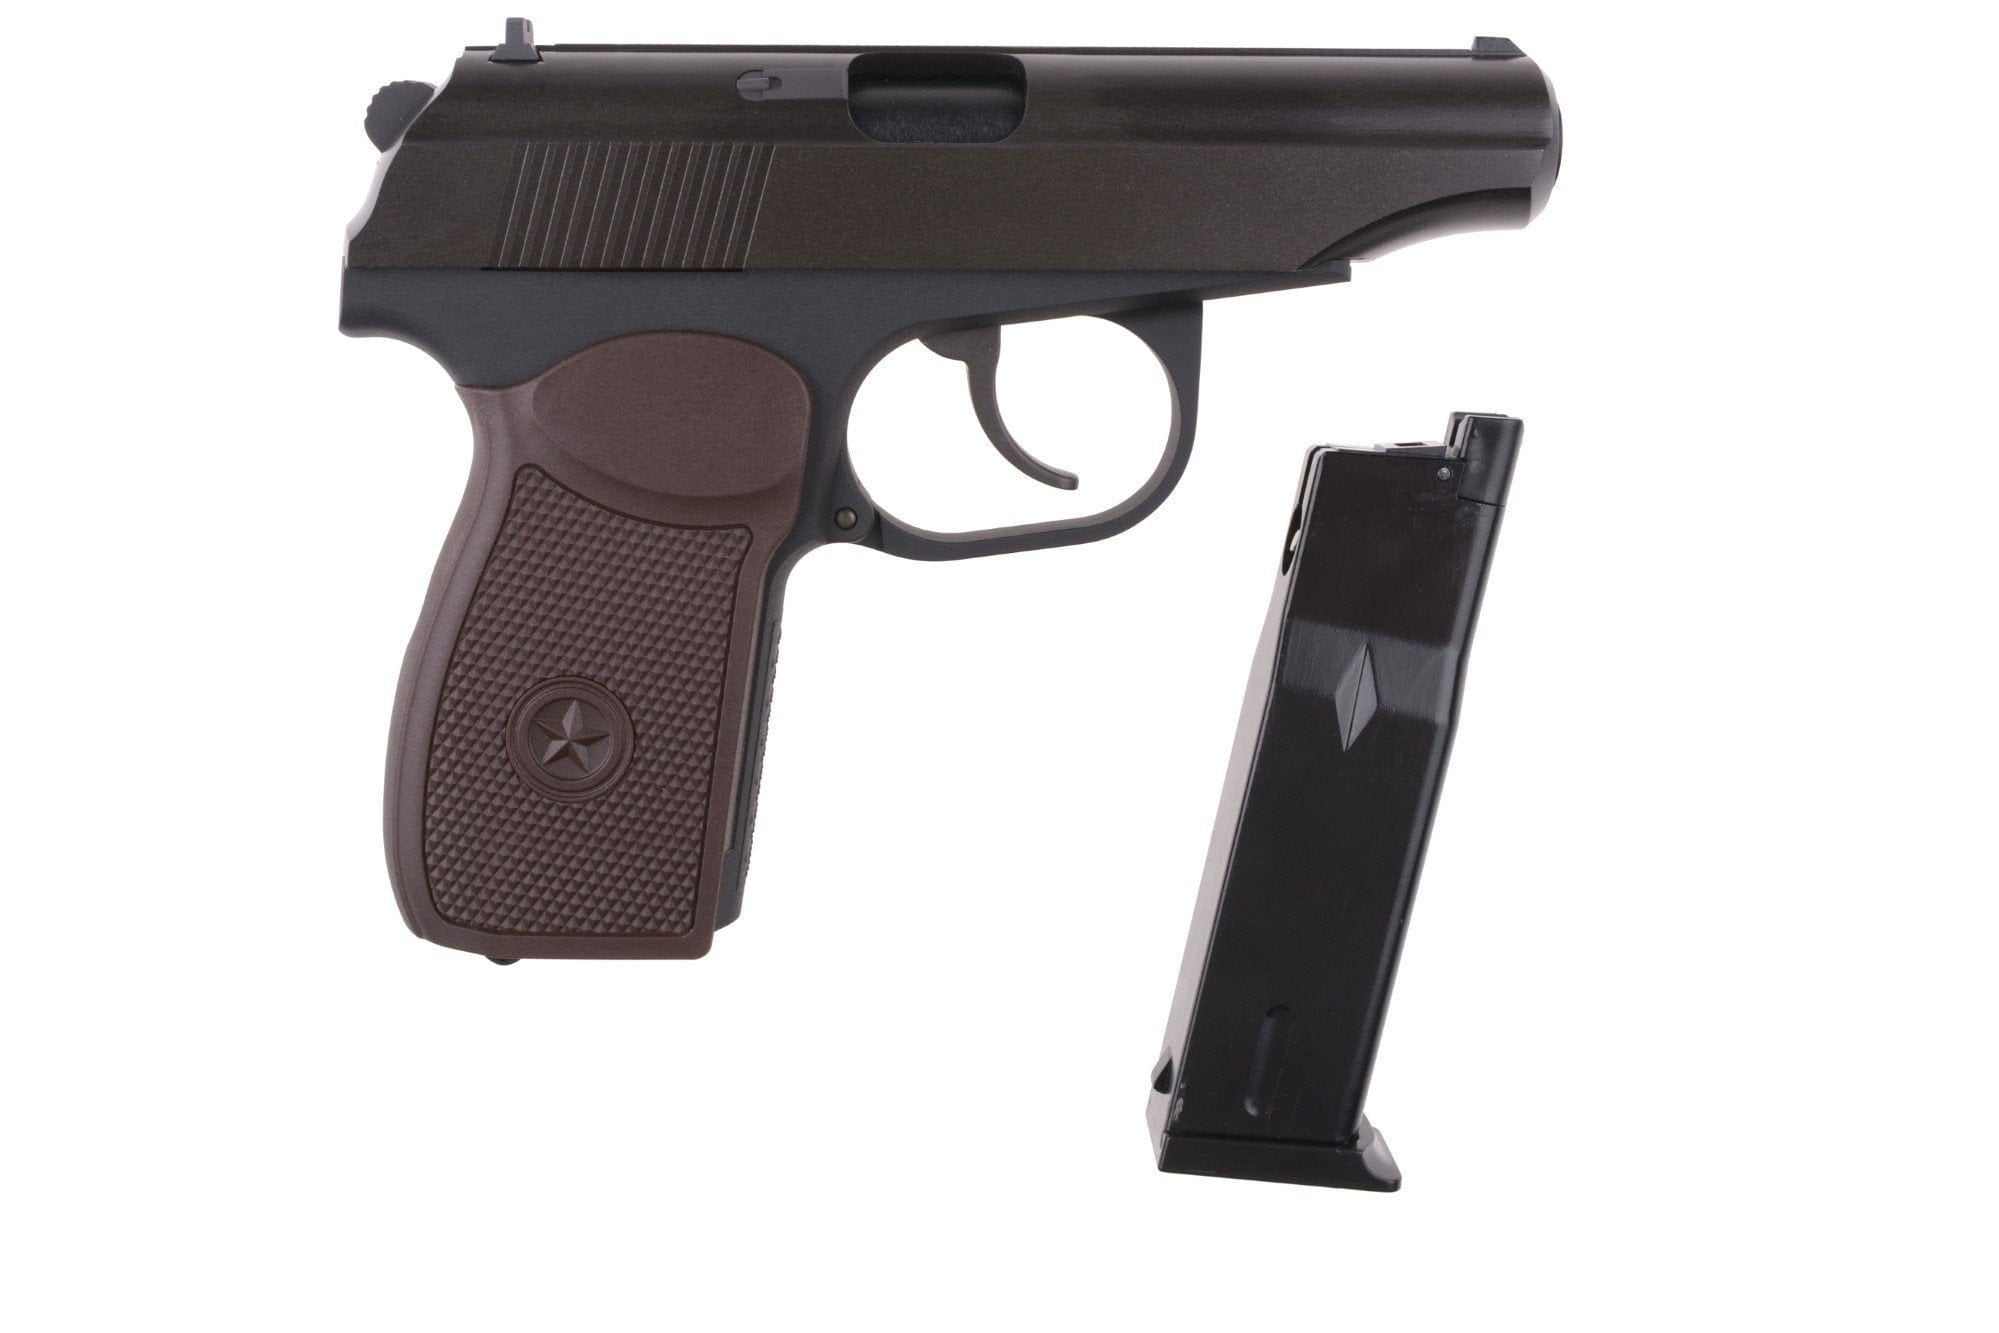 Suppressed MK Pistol Replica - Black/Brown Grip by WE on Airsoft Mania Europe